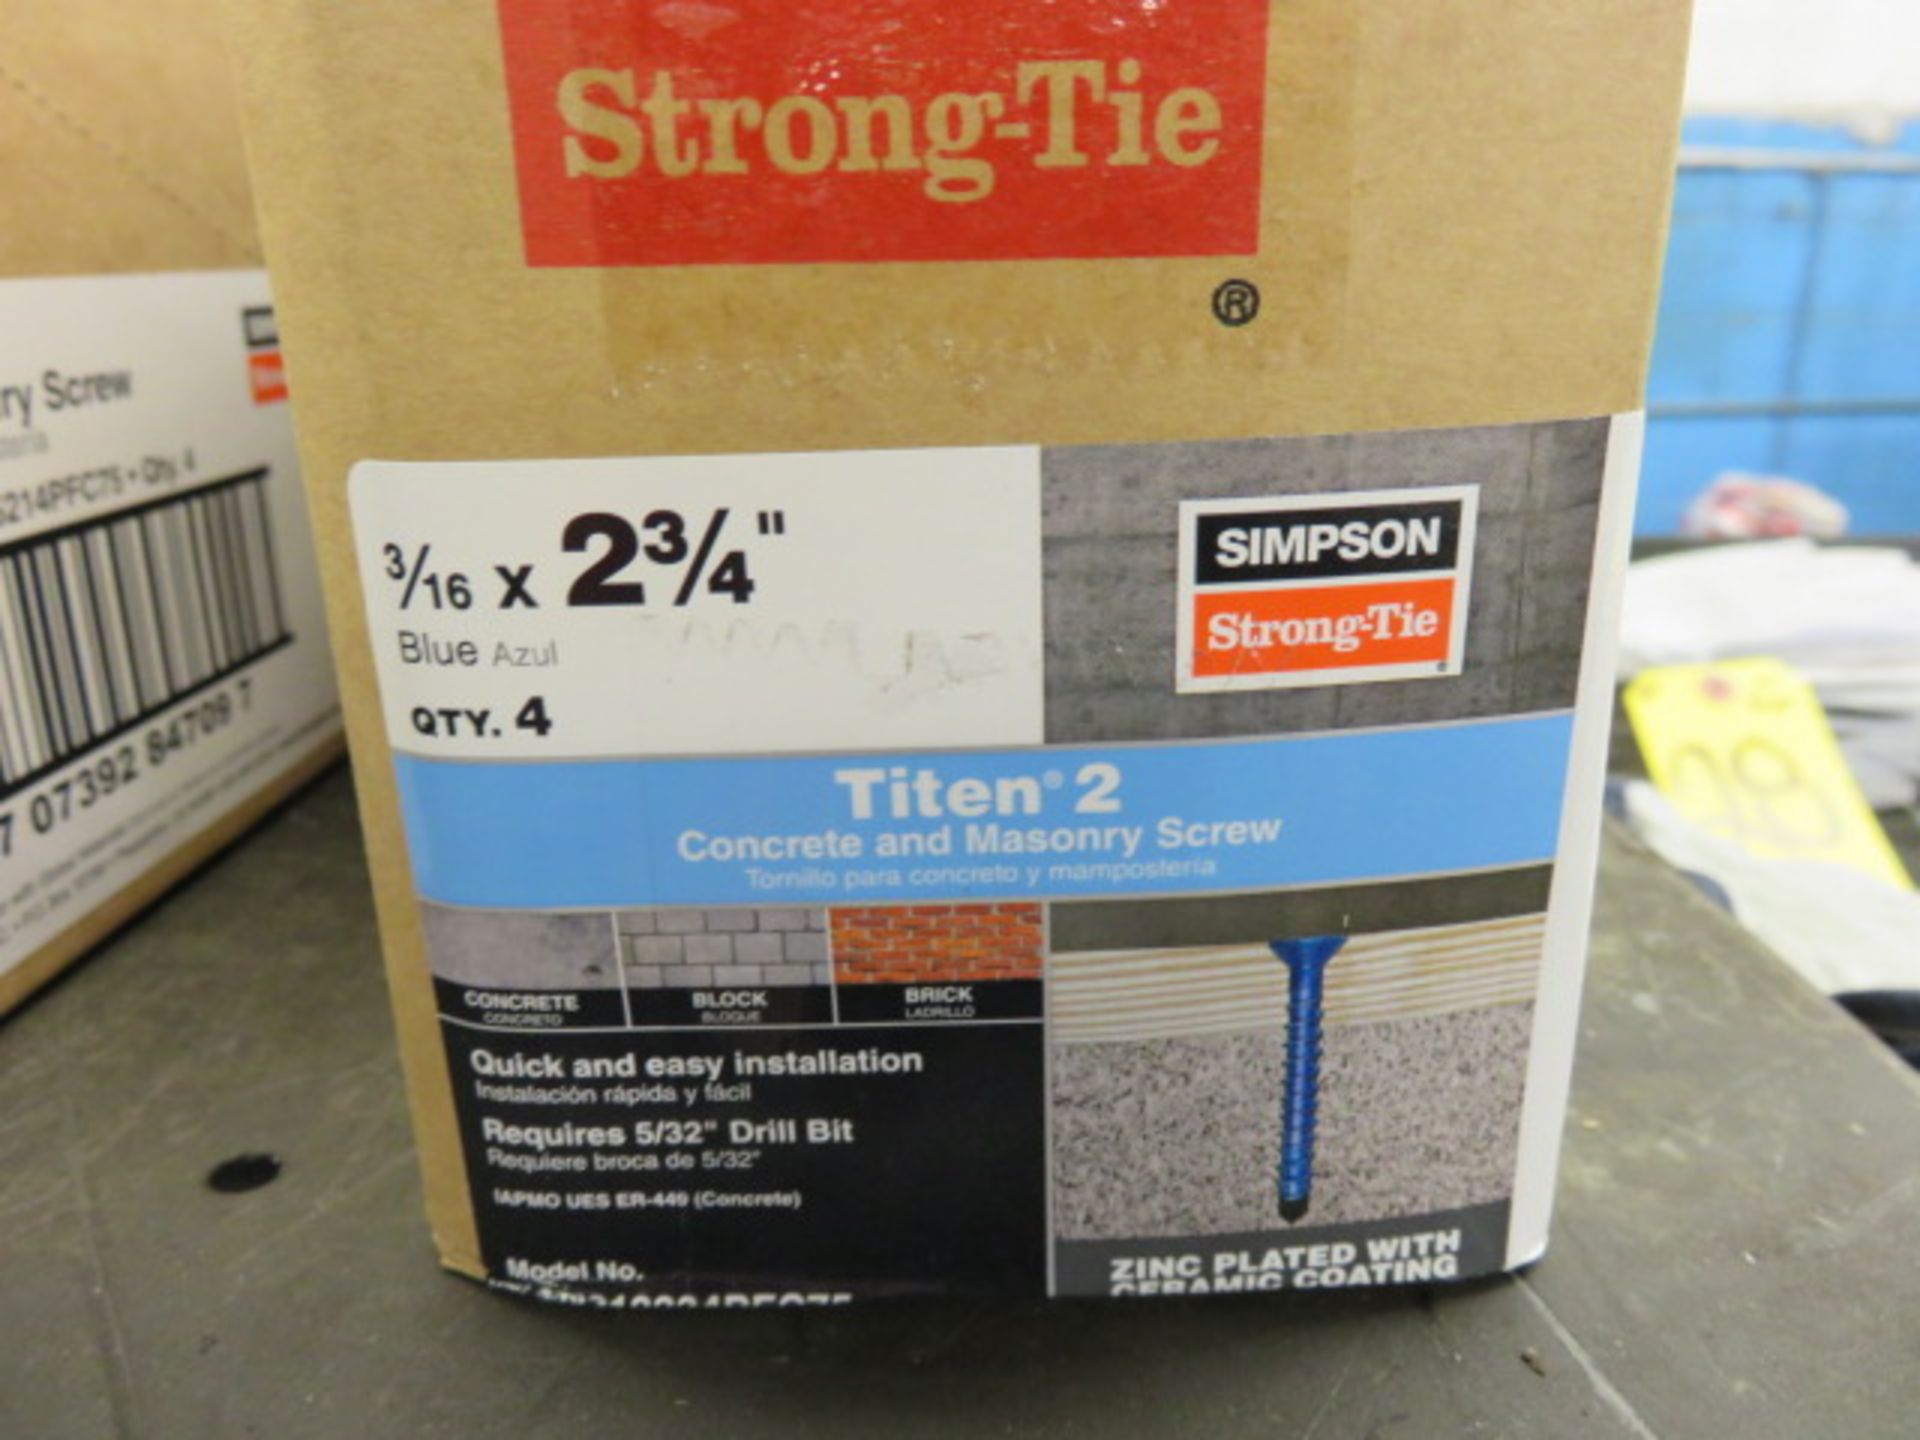 SIMPSON STRONG-TIE 3/16 X 2-3/4 IN. BLUE TITEN 2 CONCRETE AND MASONRY SCREWS (4 PACKS INSIDE) - Image 2 of 2